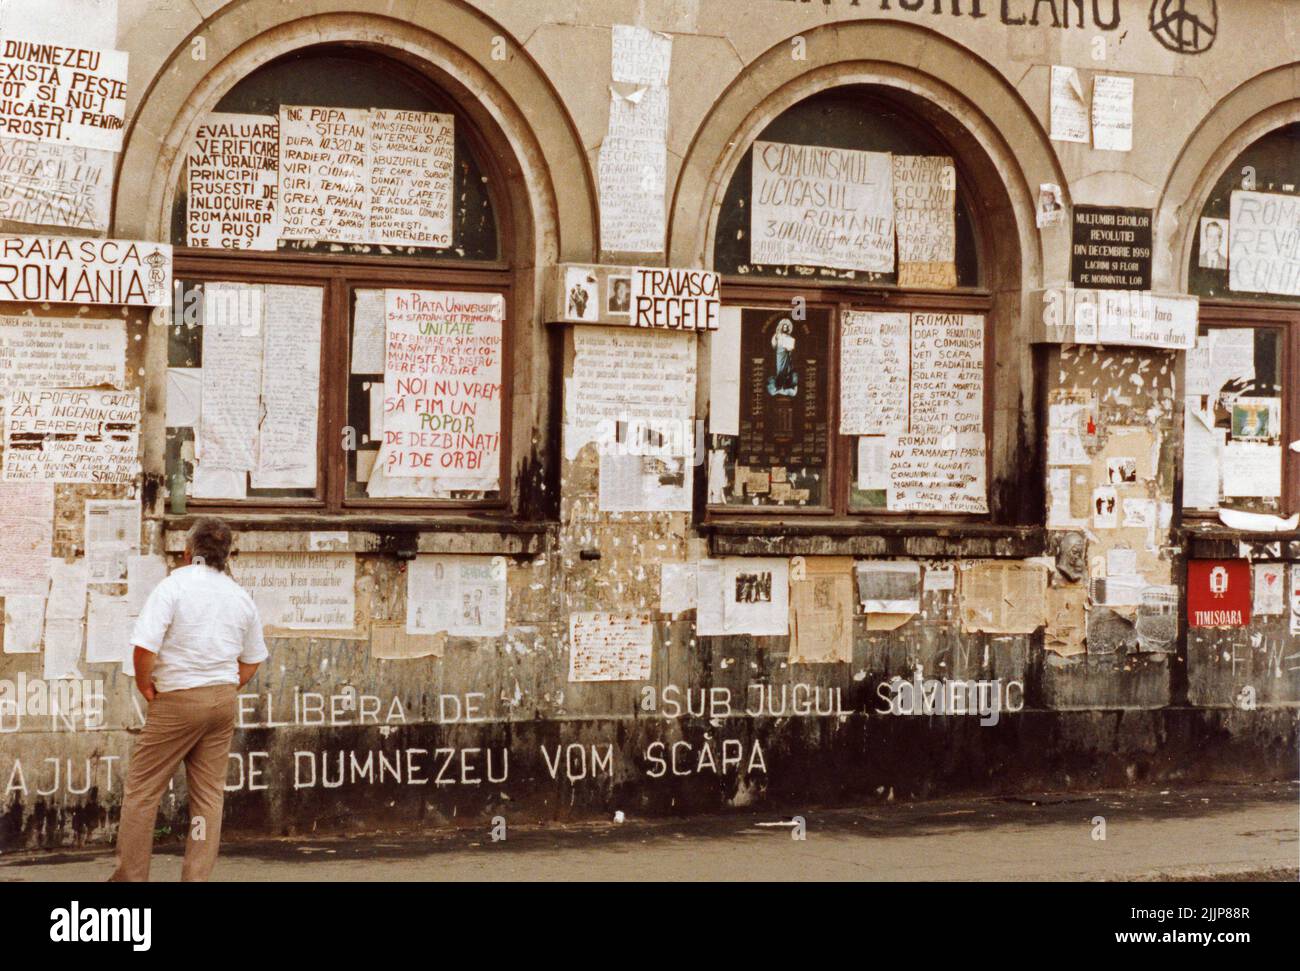 Bucharest, Romania, 1990. A few months after the anticommunist revolution of 1989, the facade of the University of Architecture is still covered in posters and messages posted by people during the uprising. The University Square, one of the key points in the revolution, remained a battle ground against the new political system, composed mainly of former communist officials. Stock Photo